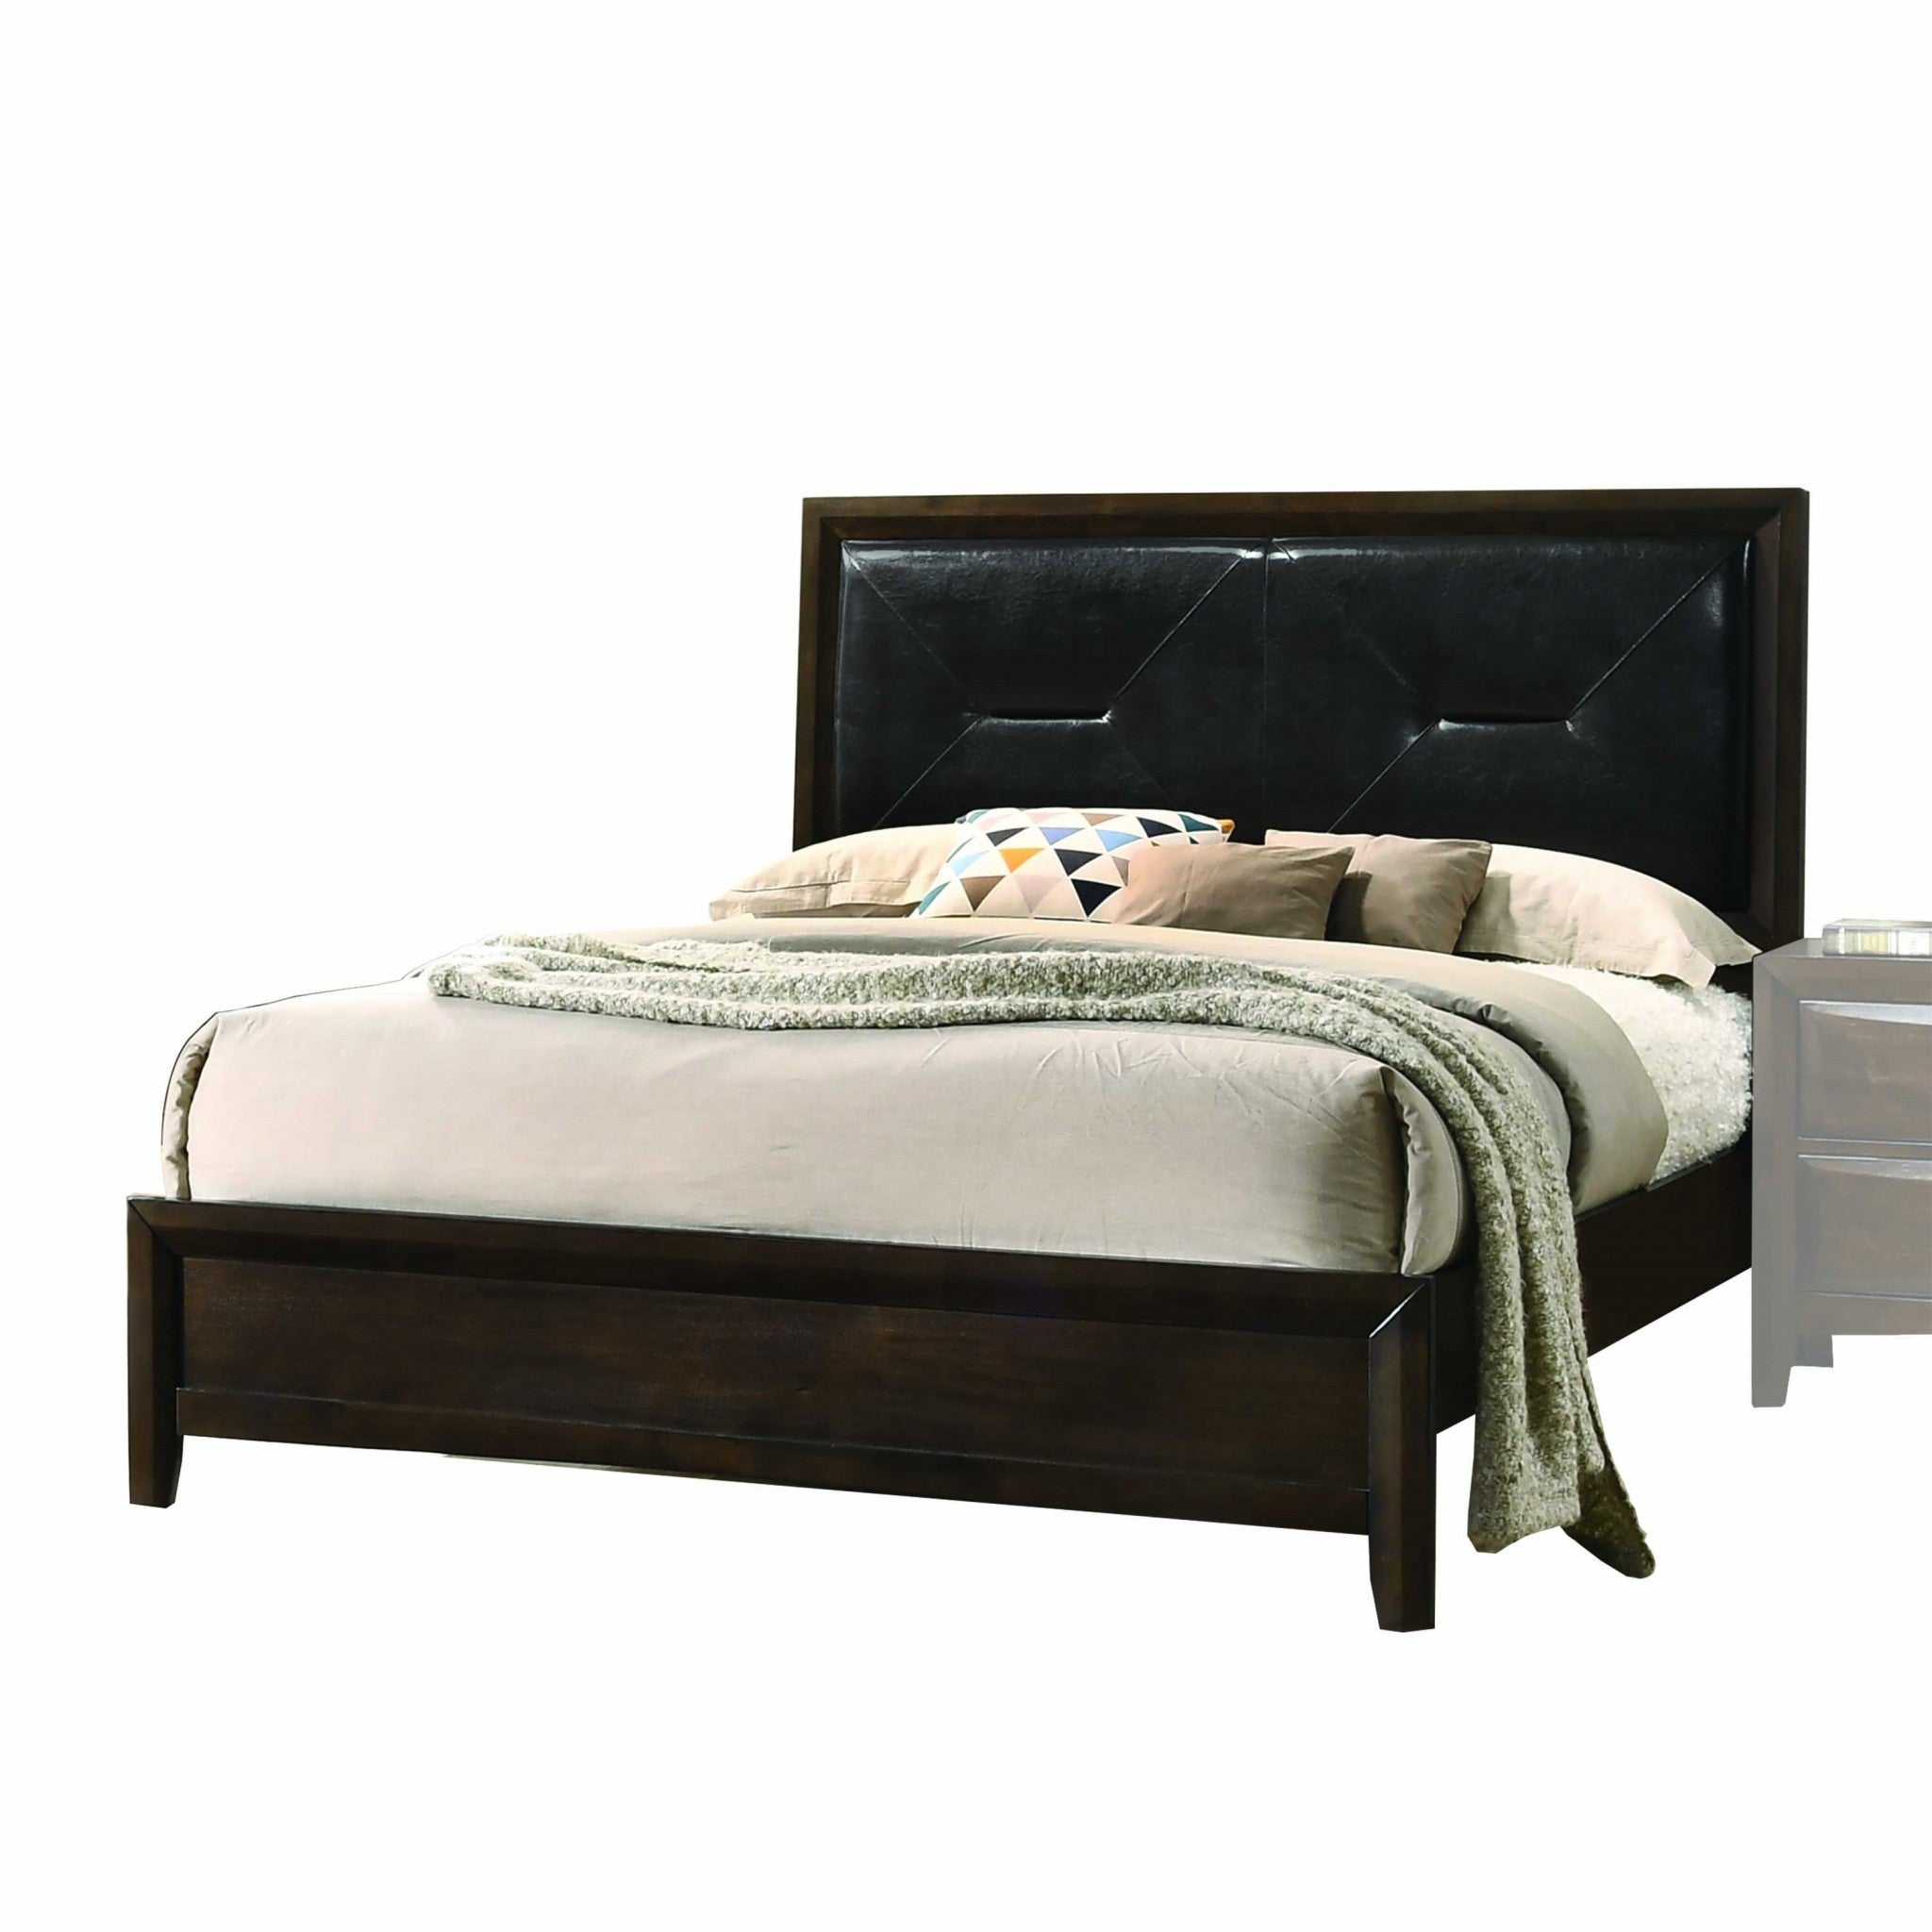 64" X 83" X 52" Black PU Walnut Wood Upholstered HB Queen Bed Default Title